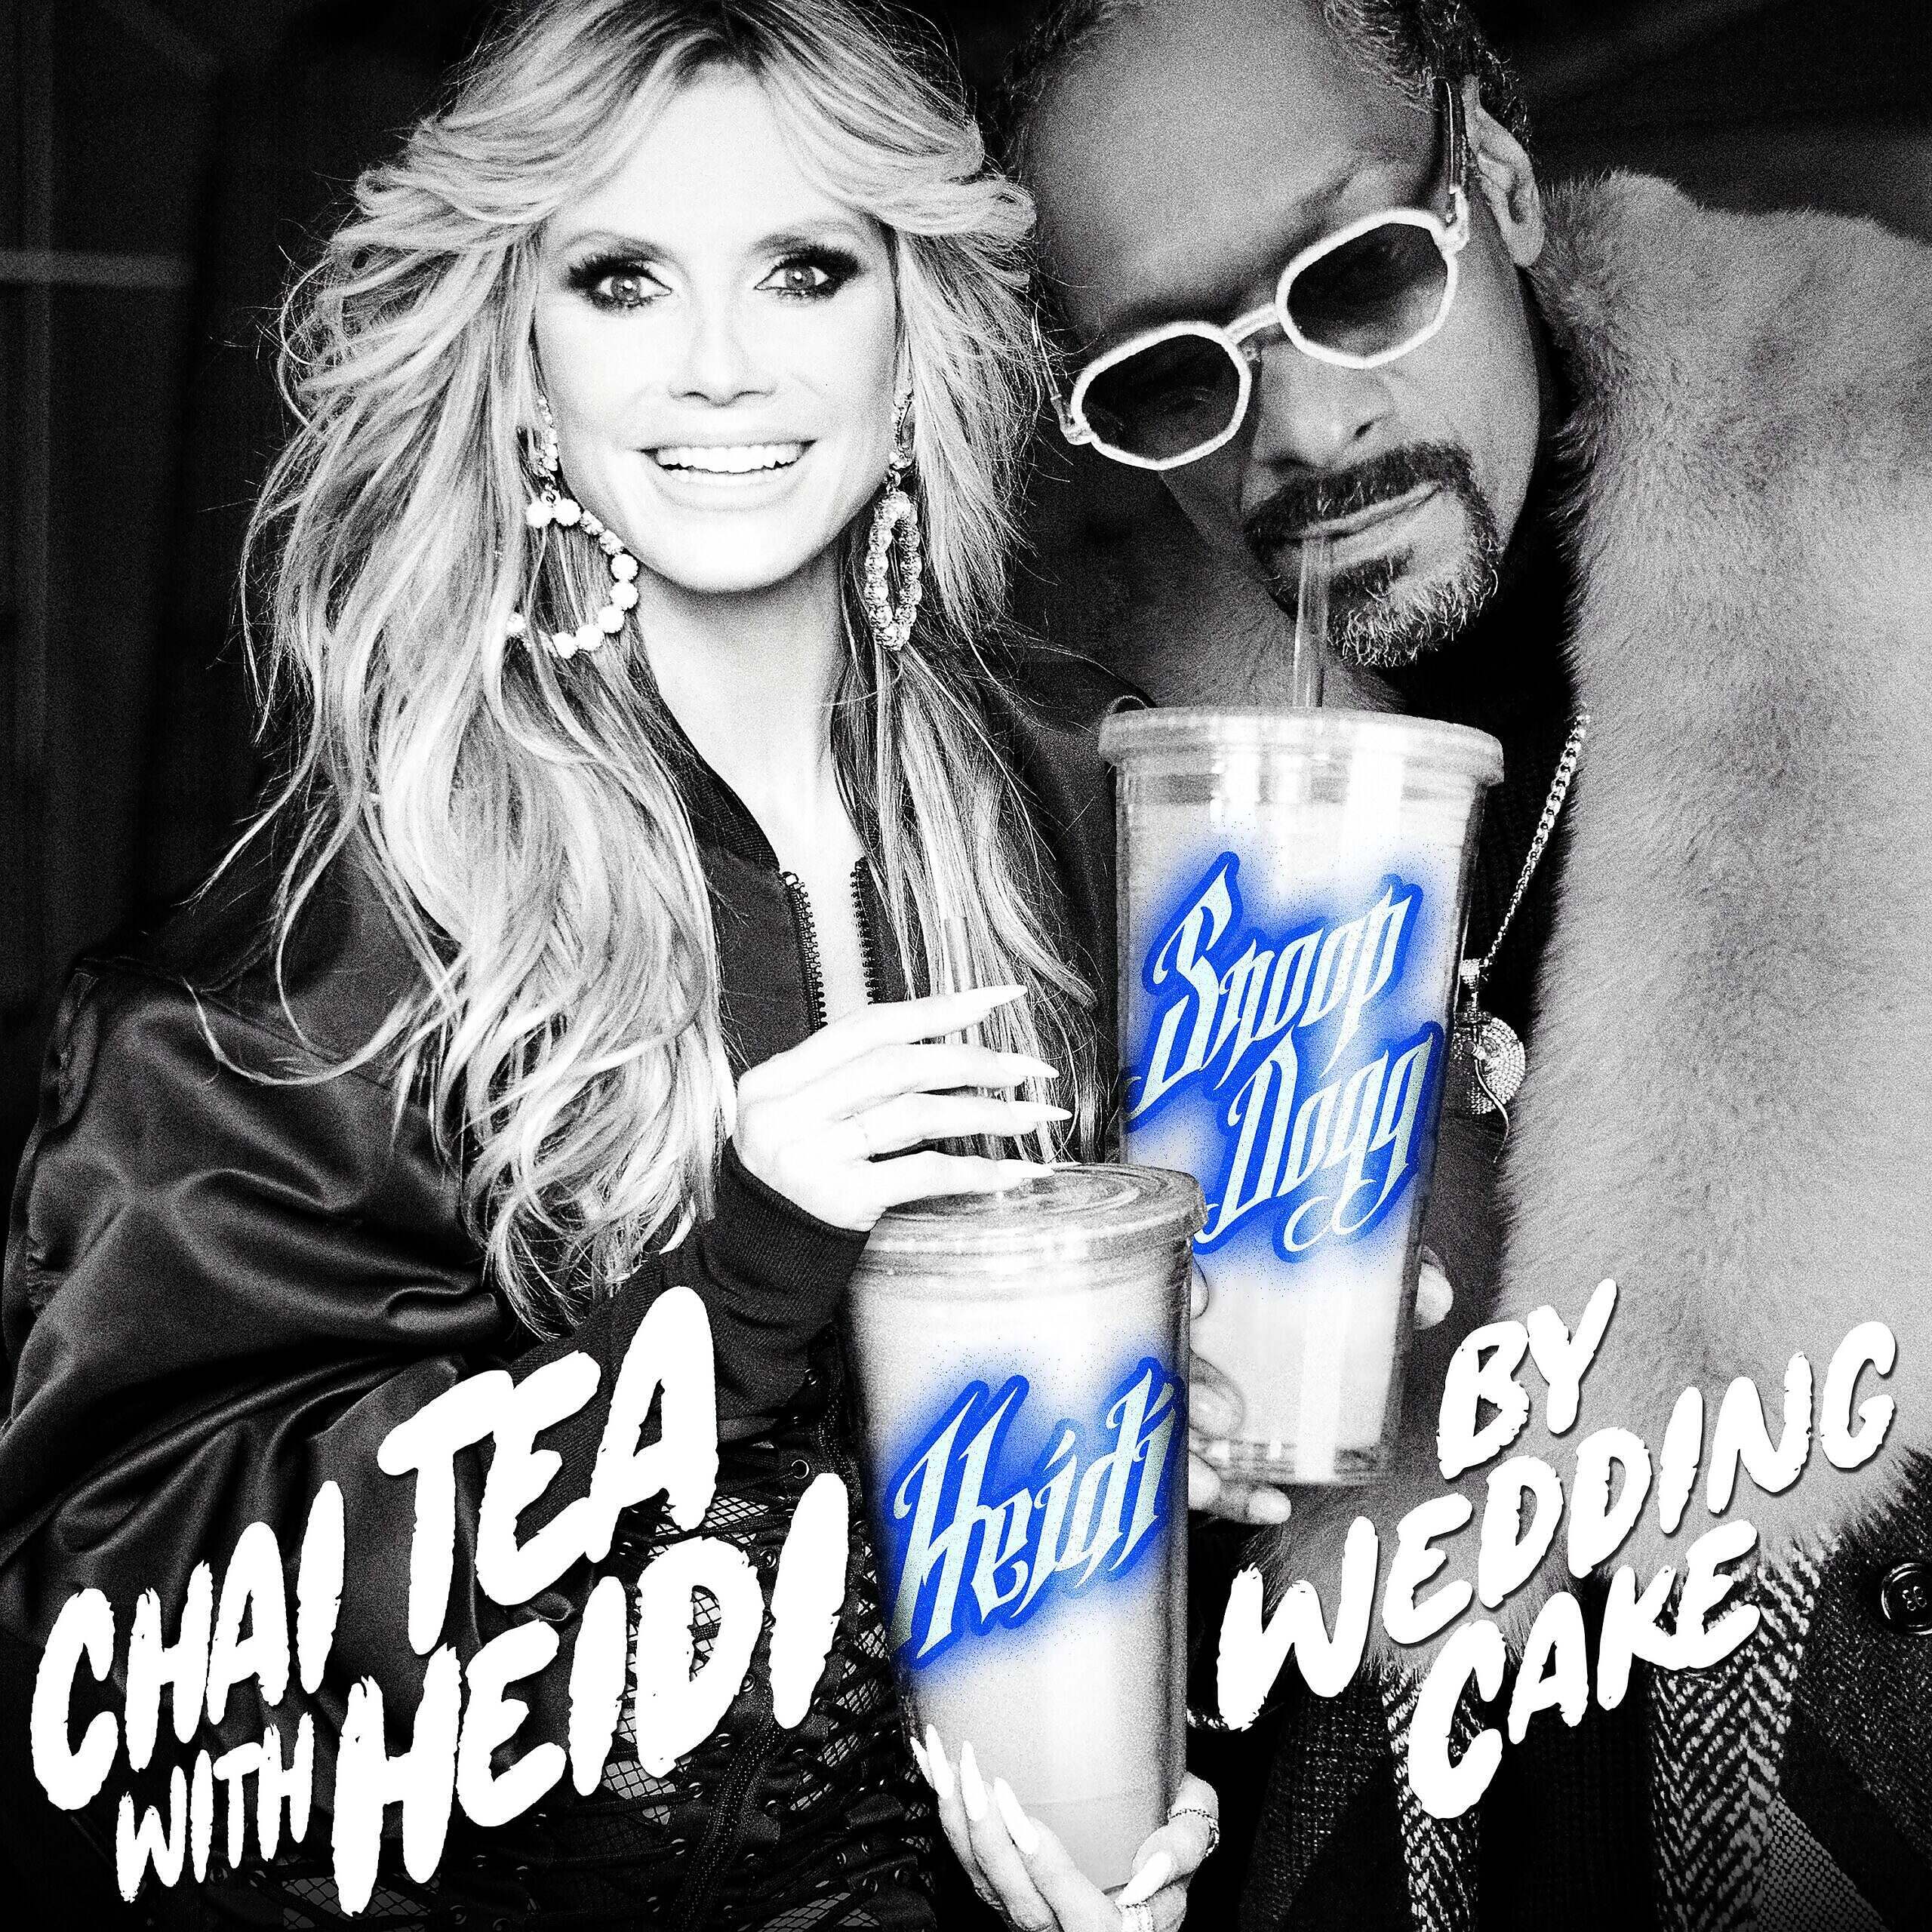 Heidi Klum Discusses Collaborating With Snoop Dogg On Her New Song "Chai Tea With Heidi", What Her Children Think Of Her New Song, & More On SiriusXM